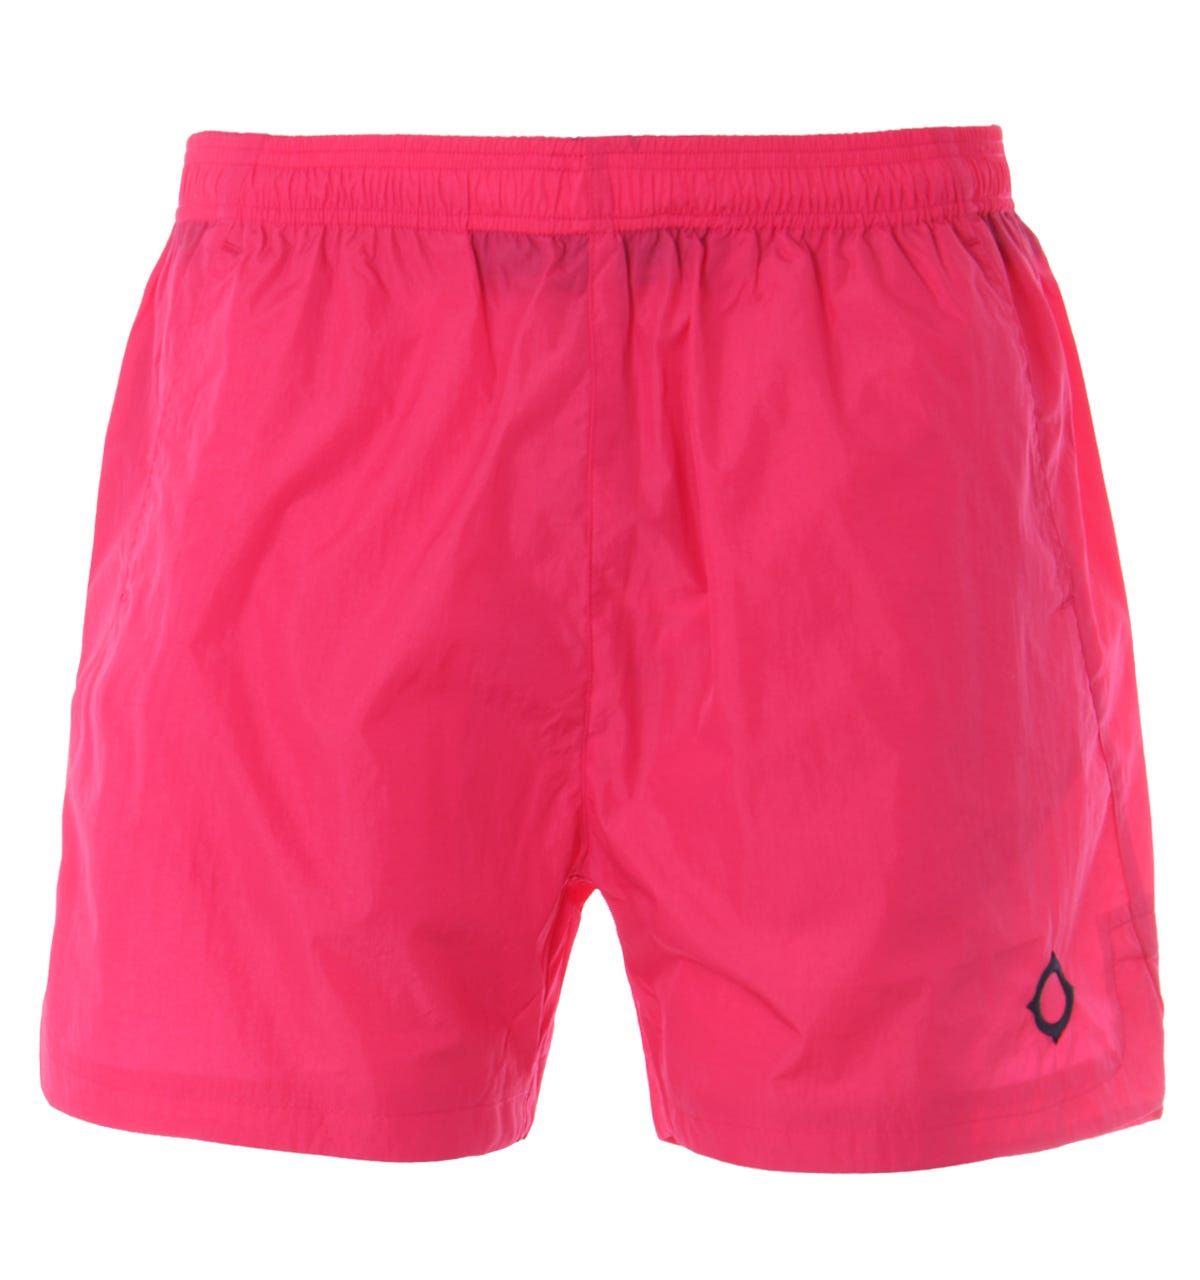 Crafted from an ultra-fine lightweight nylon these swim shorts from MA.Strum will have you boasting style by the pool. Featuring an elasticated waist with internal drawstring, twin side seam pockets and a rear zip pocket. Finished with MA.Strums iconic logo embroidered at the left leg. Regular Fit, Lightweight Nylon Composition, Internal Drawstring Waist, Twin Side Seam Pockets, Rear Zip Pocket, MA.Strum Branding. Style & Fit: Regular Fit, Fits True to Size. Composition & Care:100% Polyamide, Machine Wash.